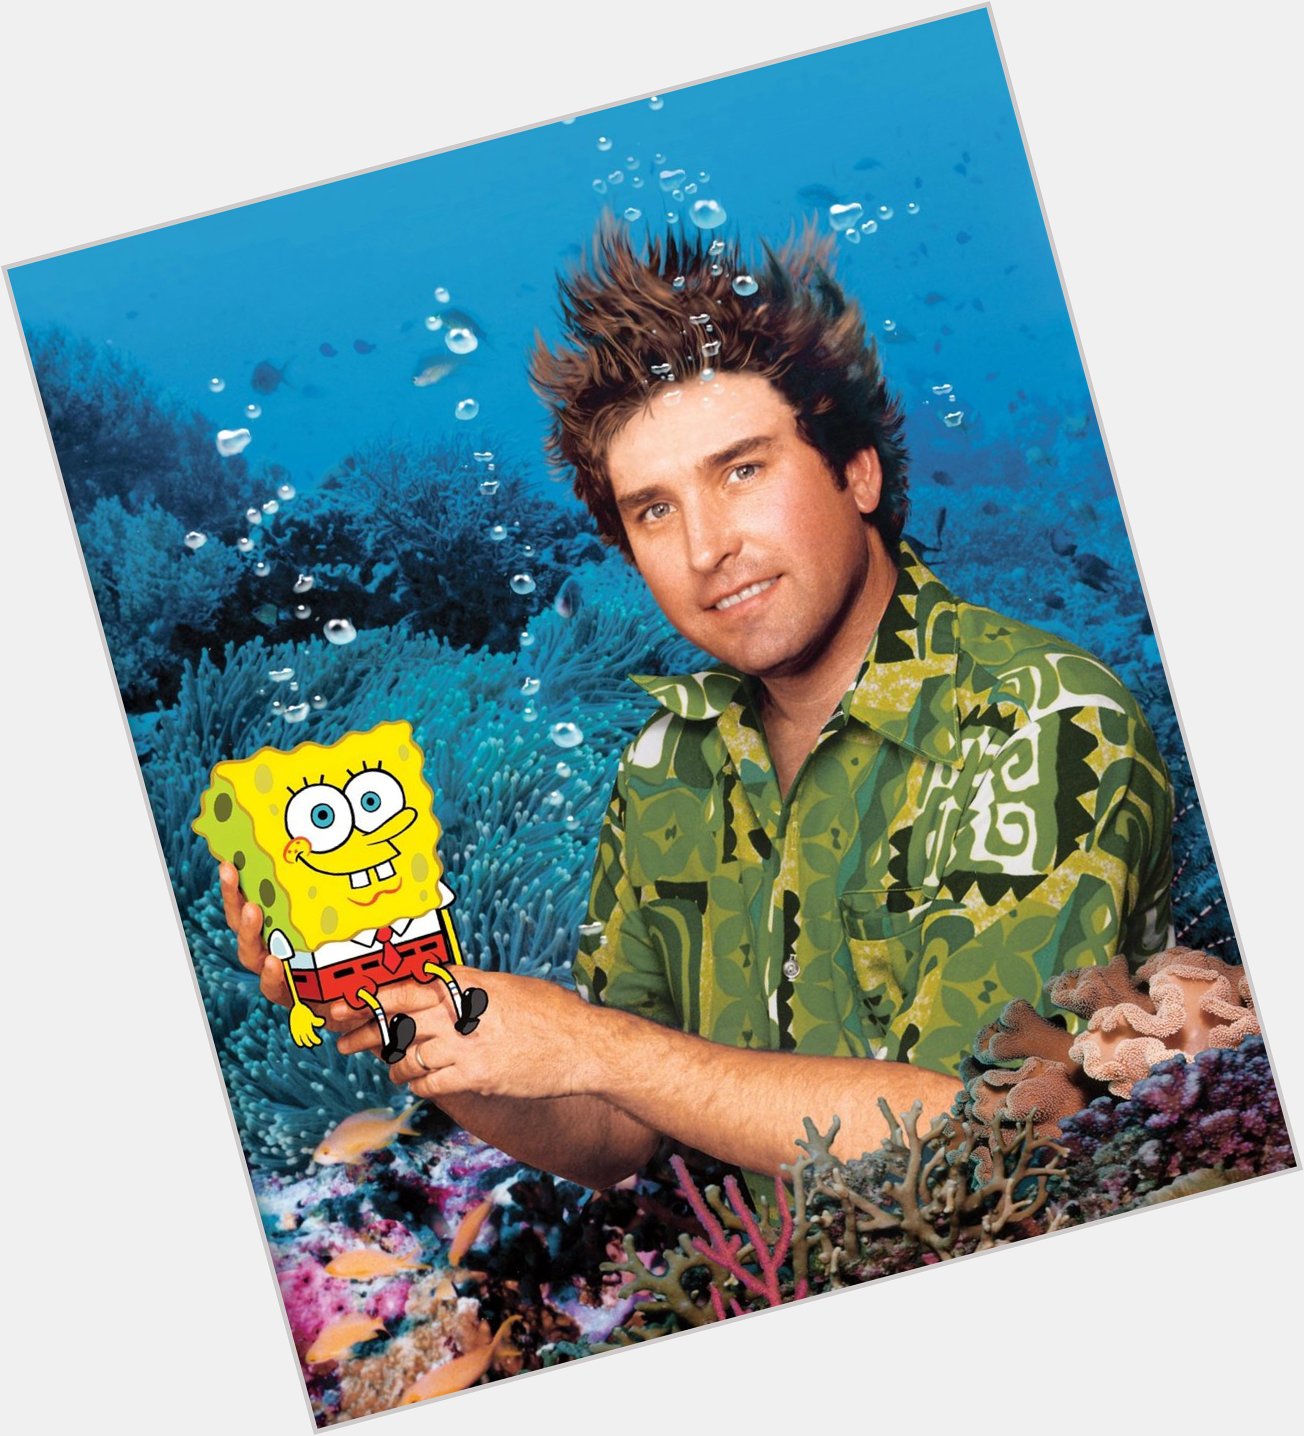 Happy 59th birthday to a real one, Stephen Hillenburg 